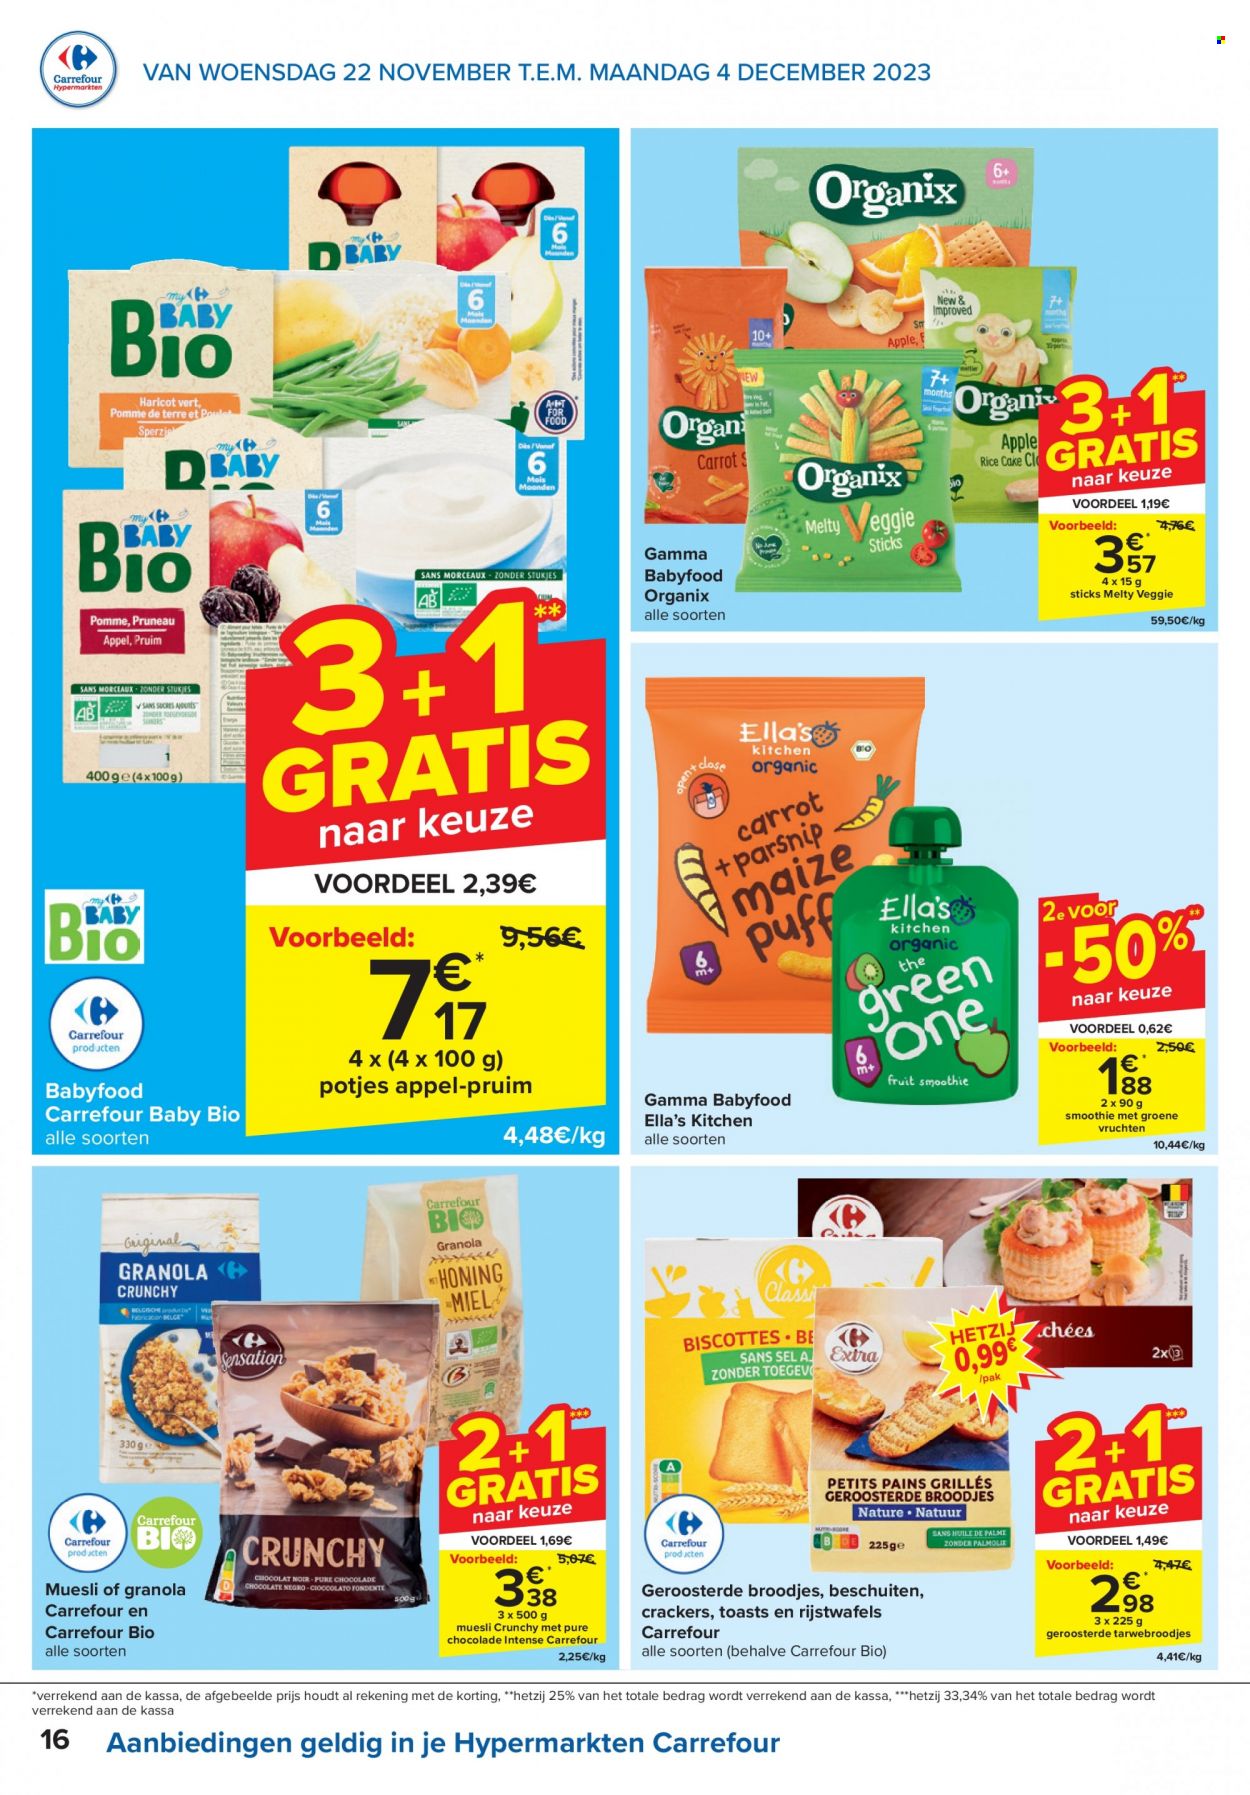 Catalogue Carrefour hypermarkt - 22.11.2023 - 4.12.2023. Page 16.